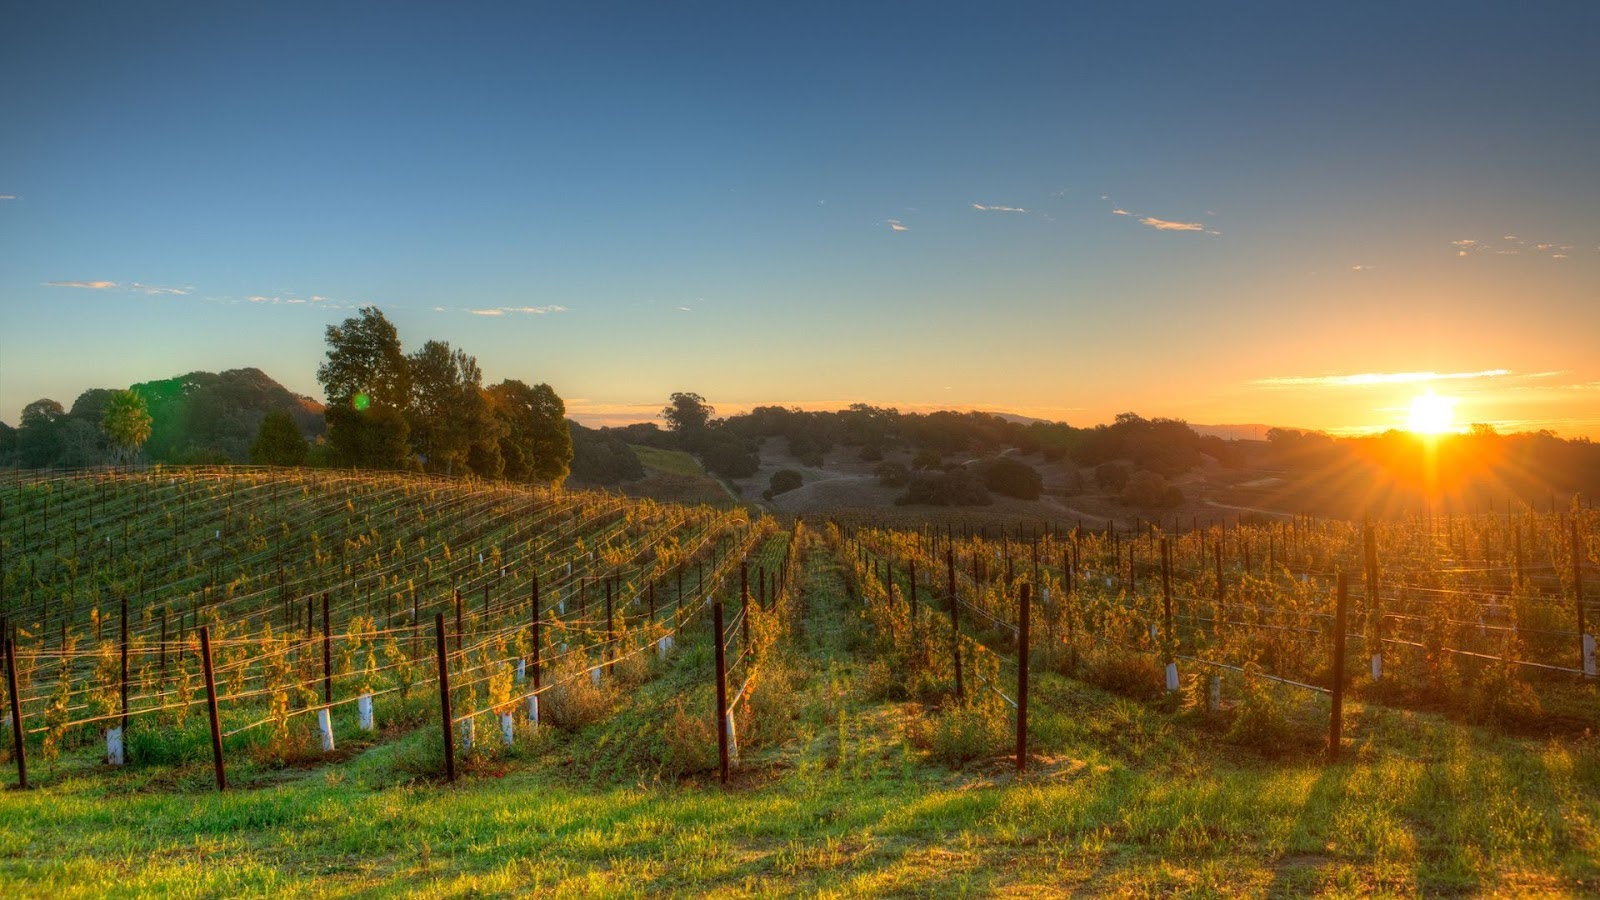 Best Vacation Spots for Couples - Napa Valley